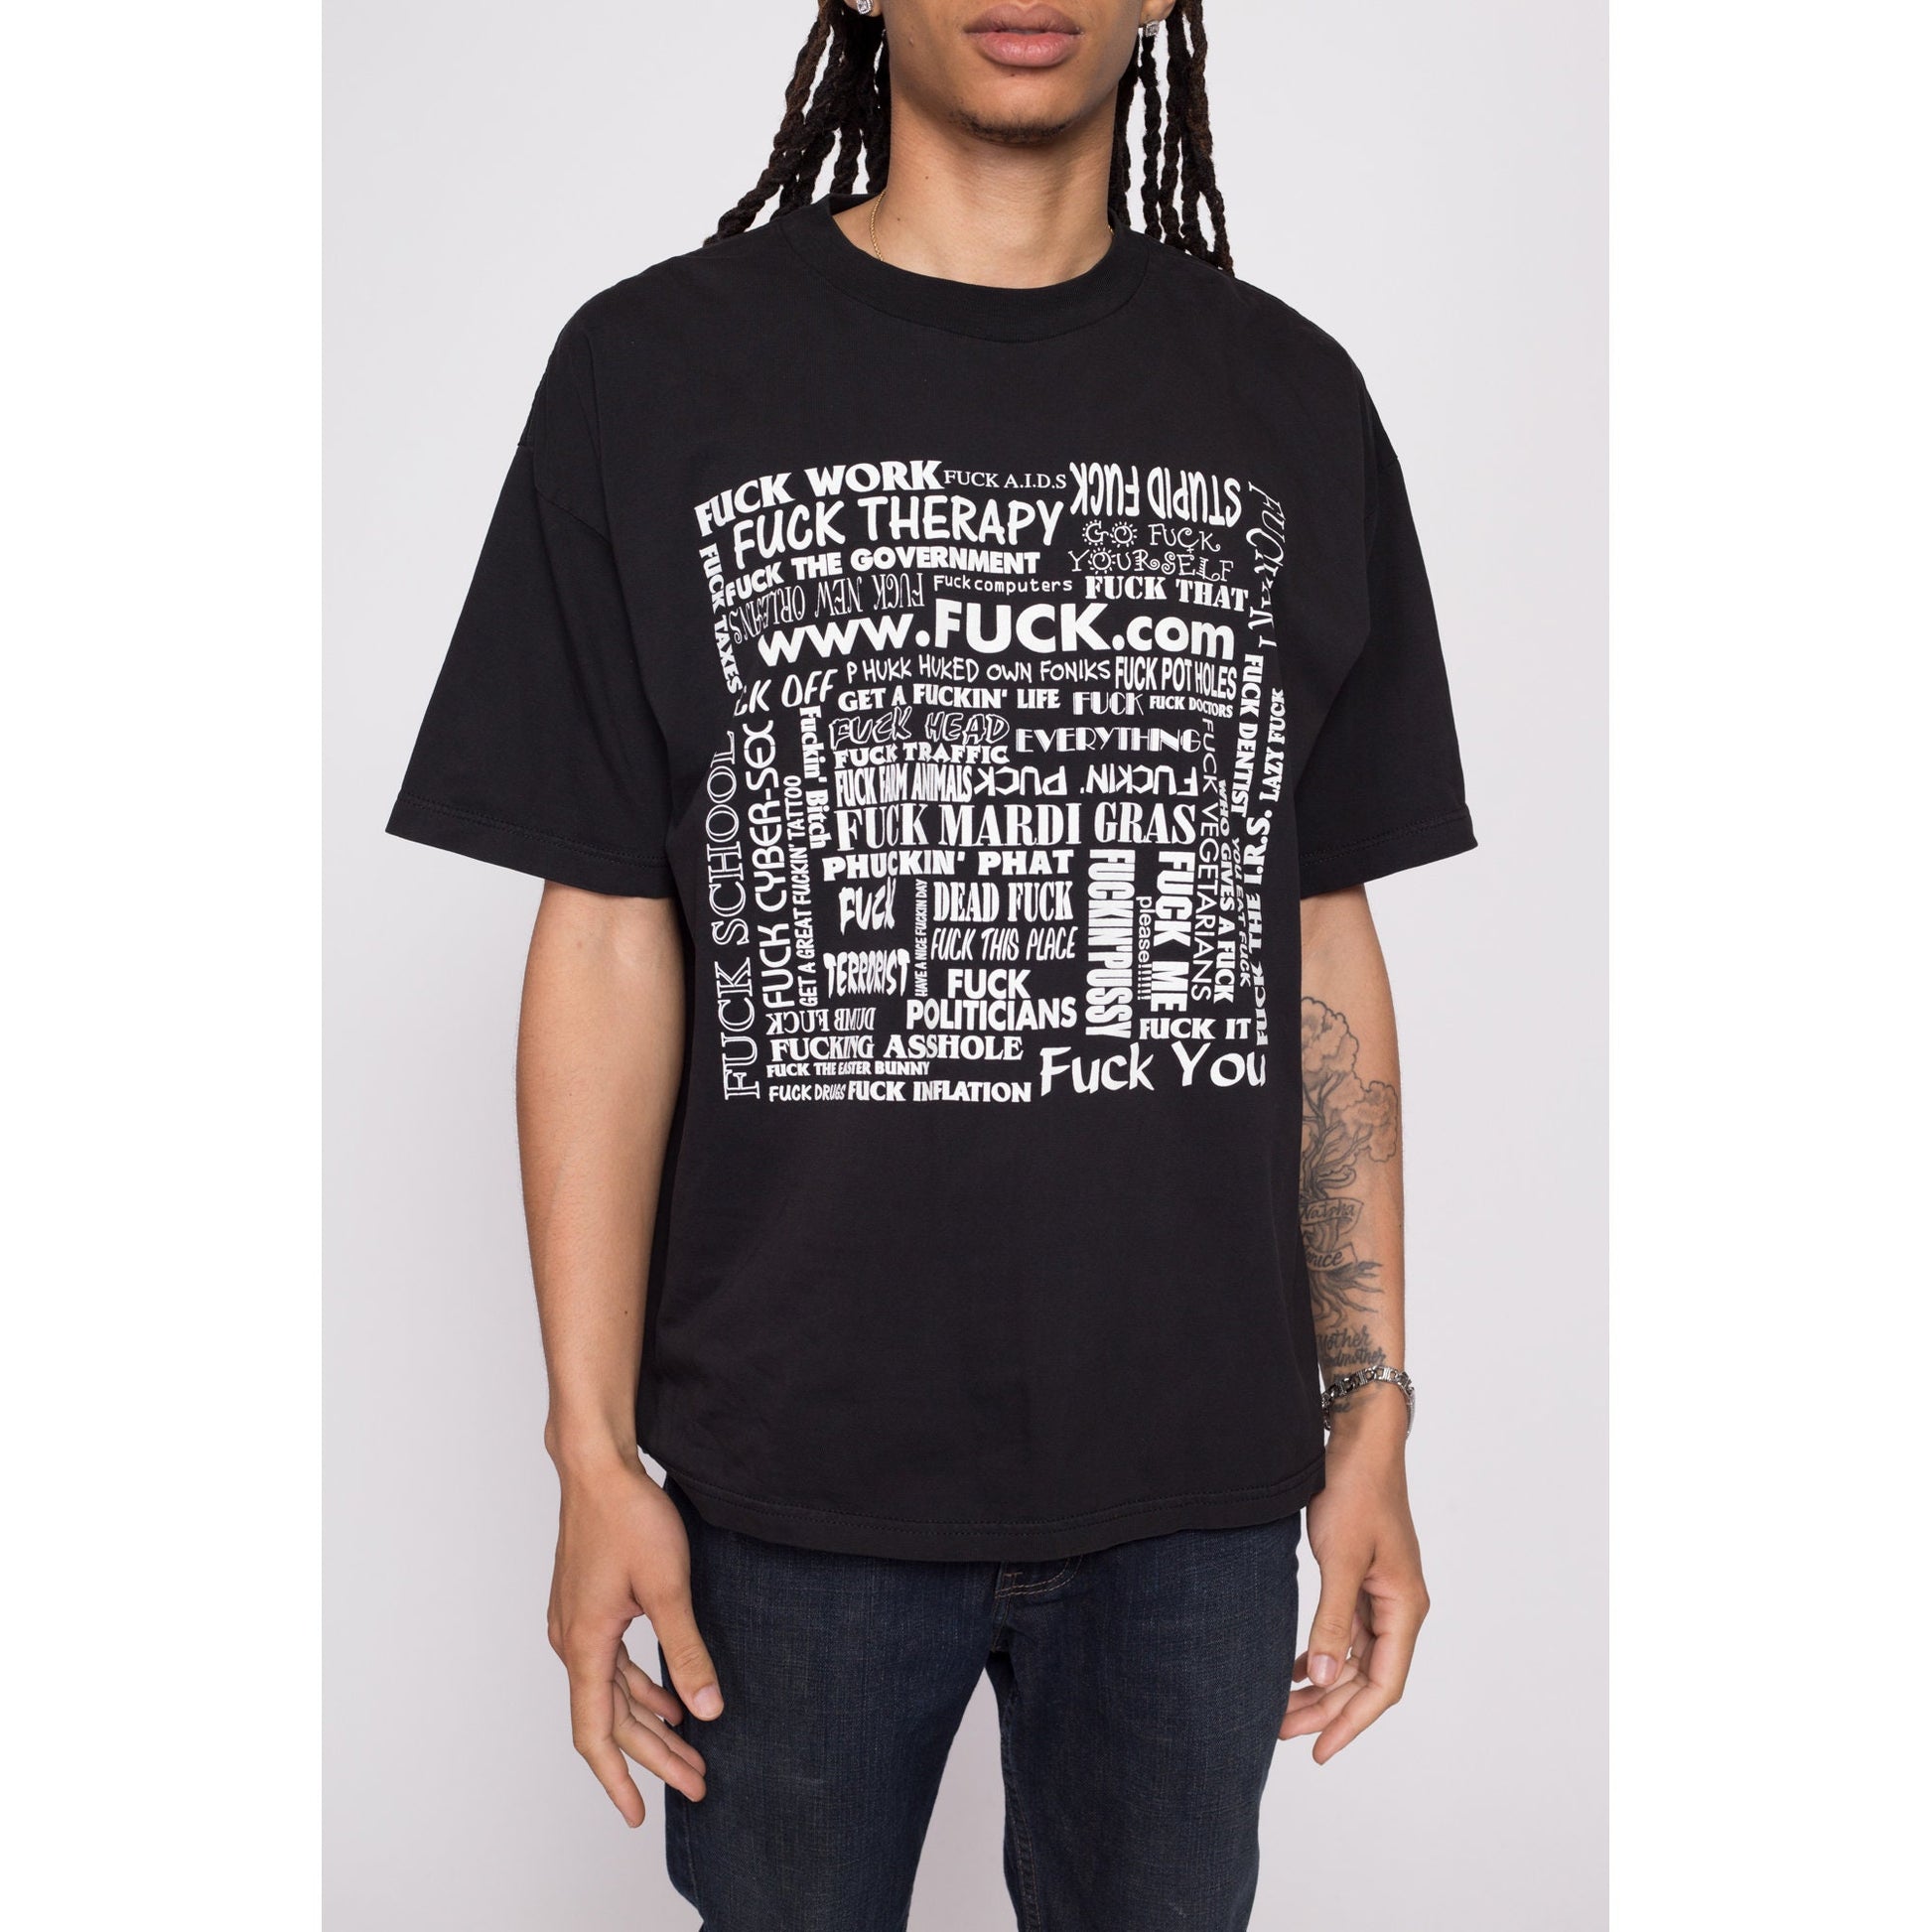 Vintage Fuck Everything T Shirt - Men's XL | 90s Y2K Funny Black Crude Graphic T Shirt